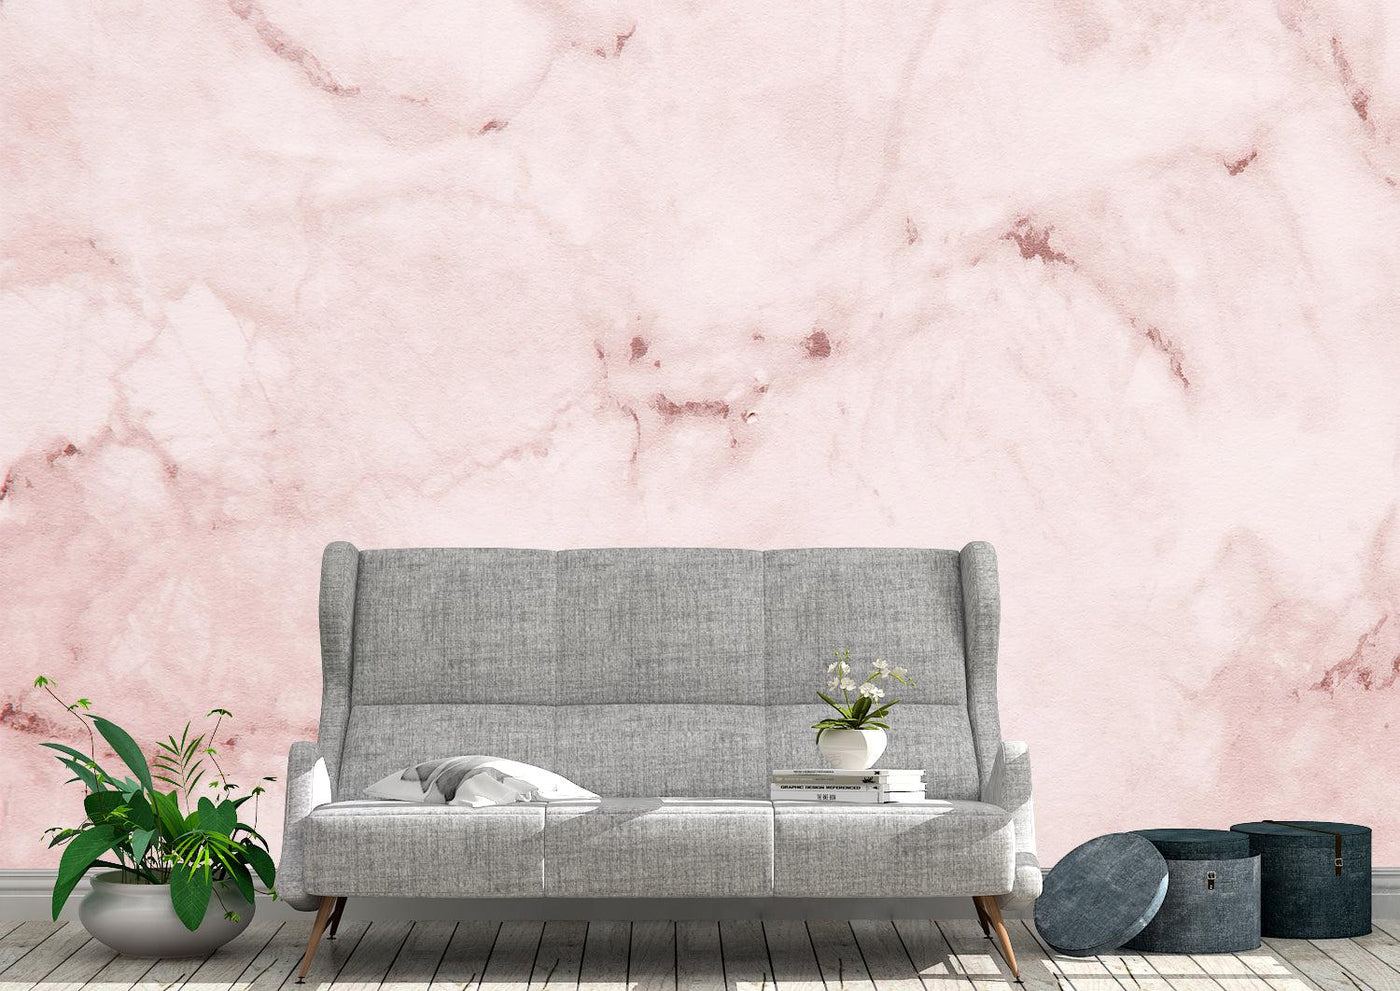 Kootenay Rose Mural Wallpaper (m²)-Wall Decor-MURALS, MURALS / WALLPAPERS, NON-WOVEN WALLPAPER, STONE WALLPAPERS-Forest Homes-Nature inspired decor-Nature decor